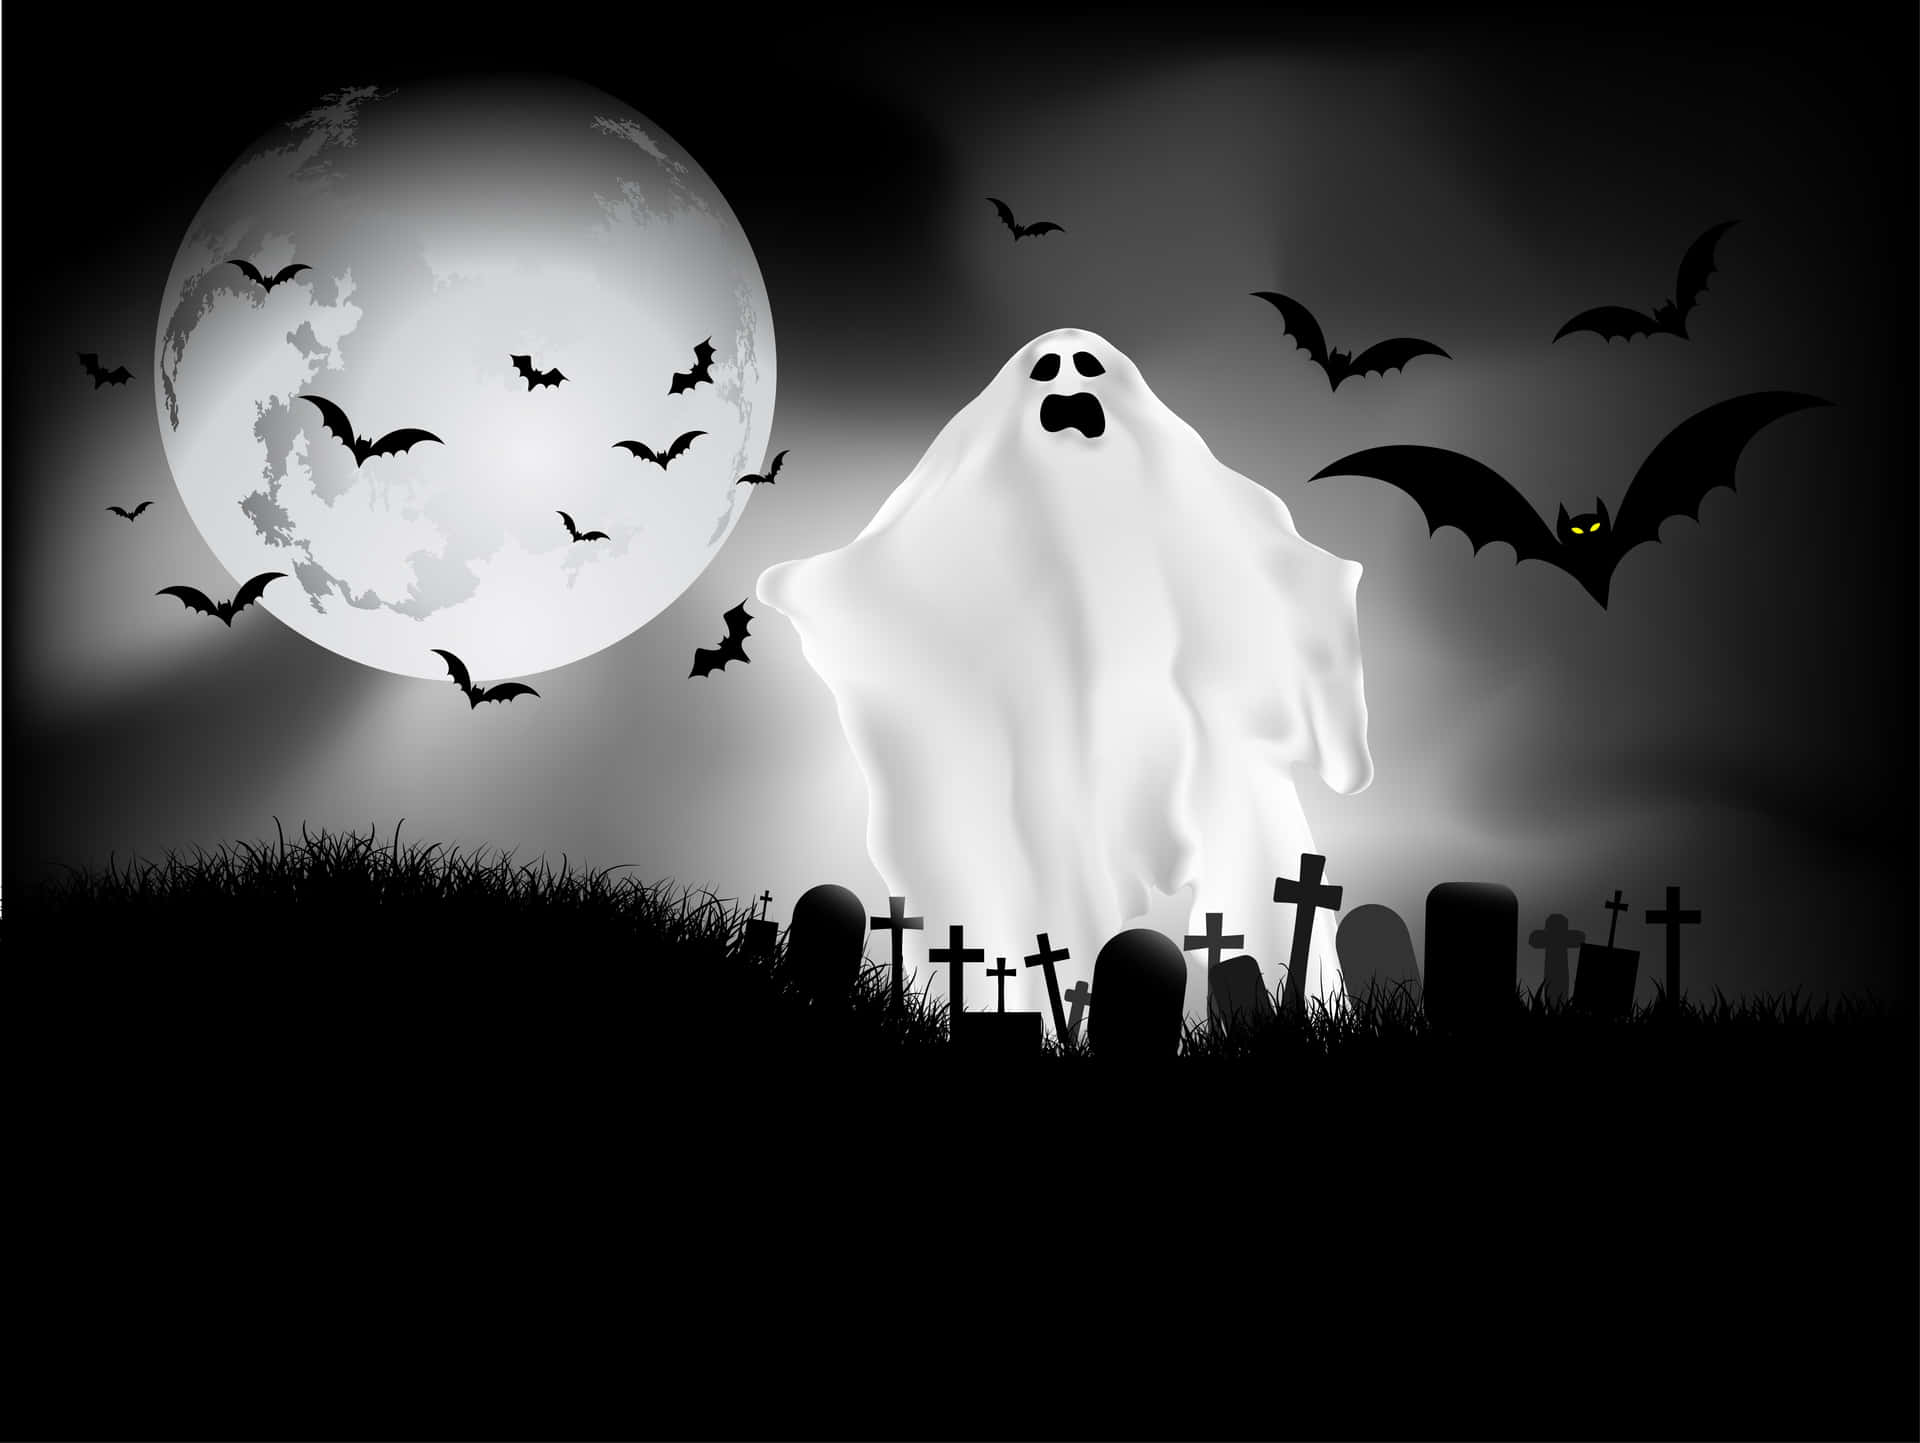 Embrace the mysterious and unknown with a Ghost background image